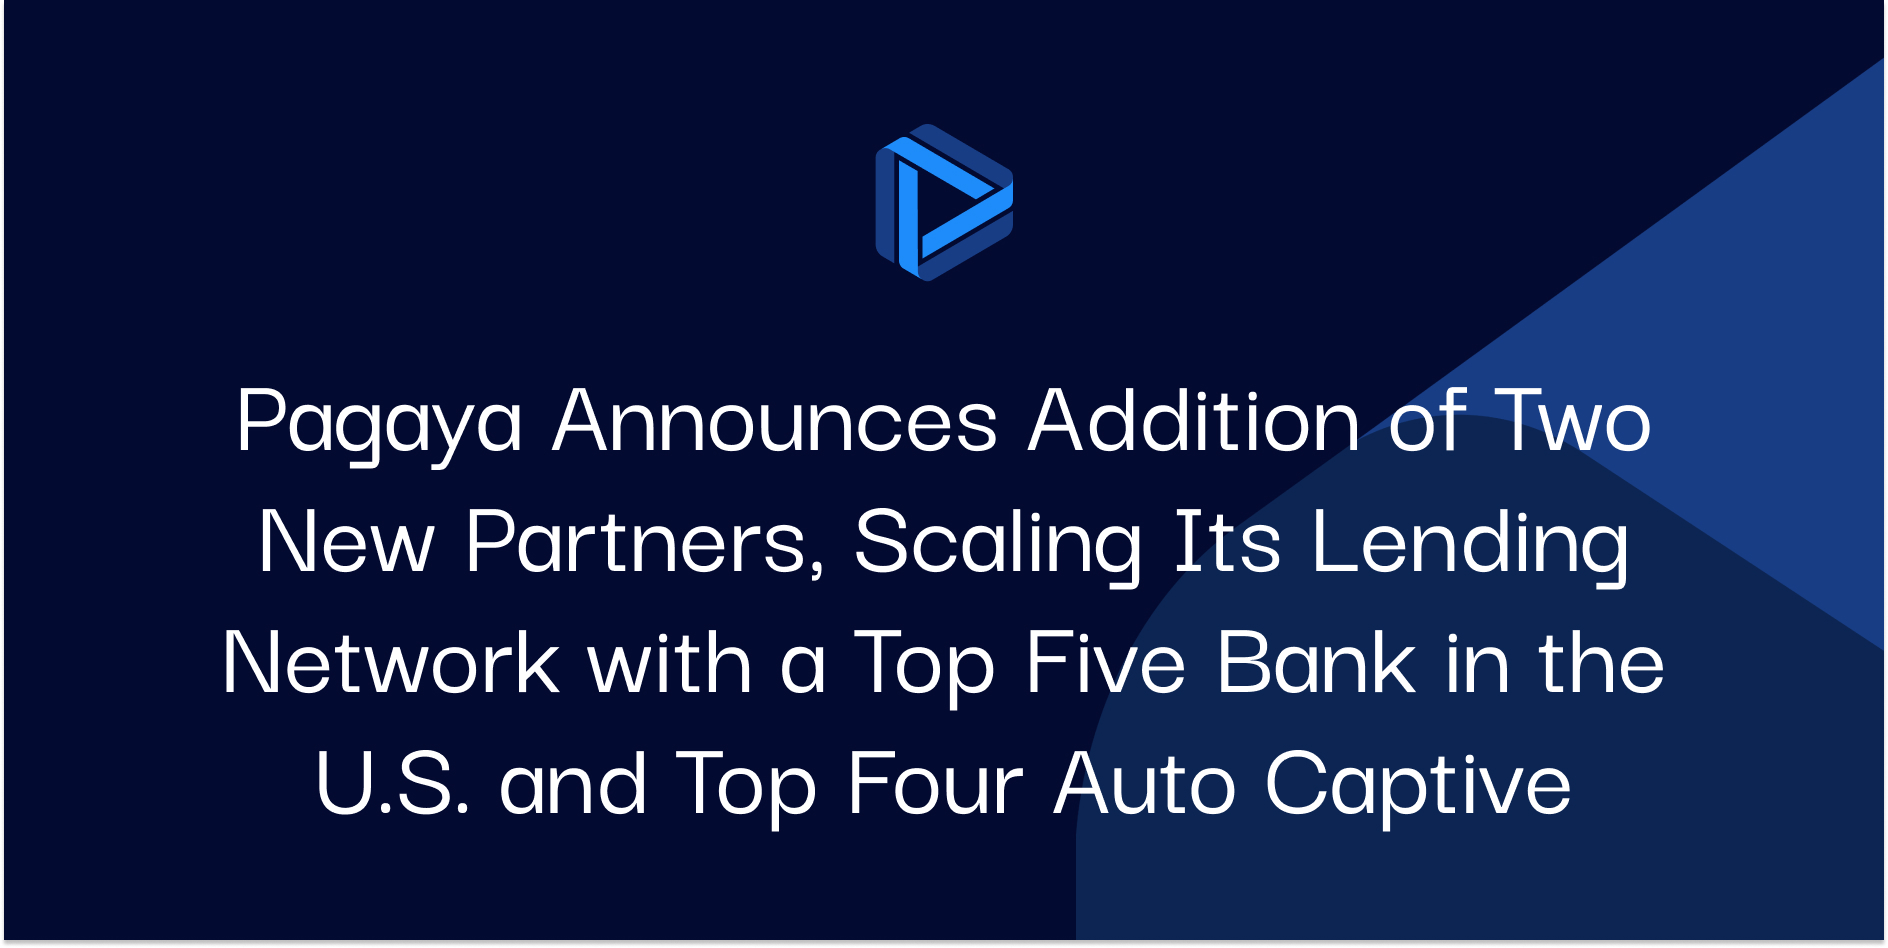 Pagaya Announces Addition of Two New Partners, Scaling Its Lending Network with a Top Five Bank in the U.S. and Top Four Auto Captive